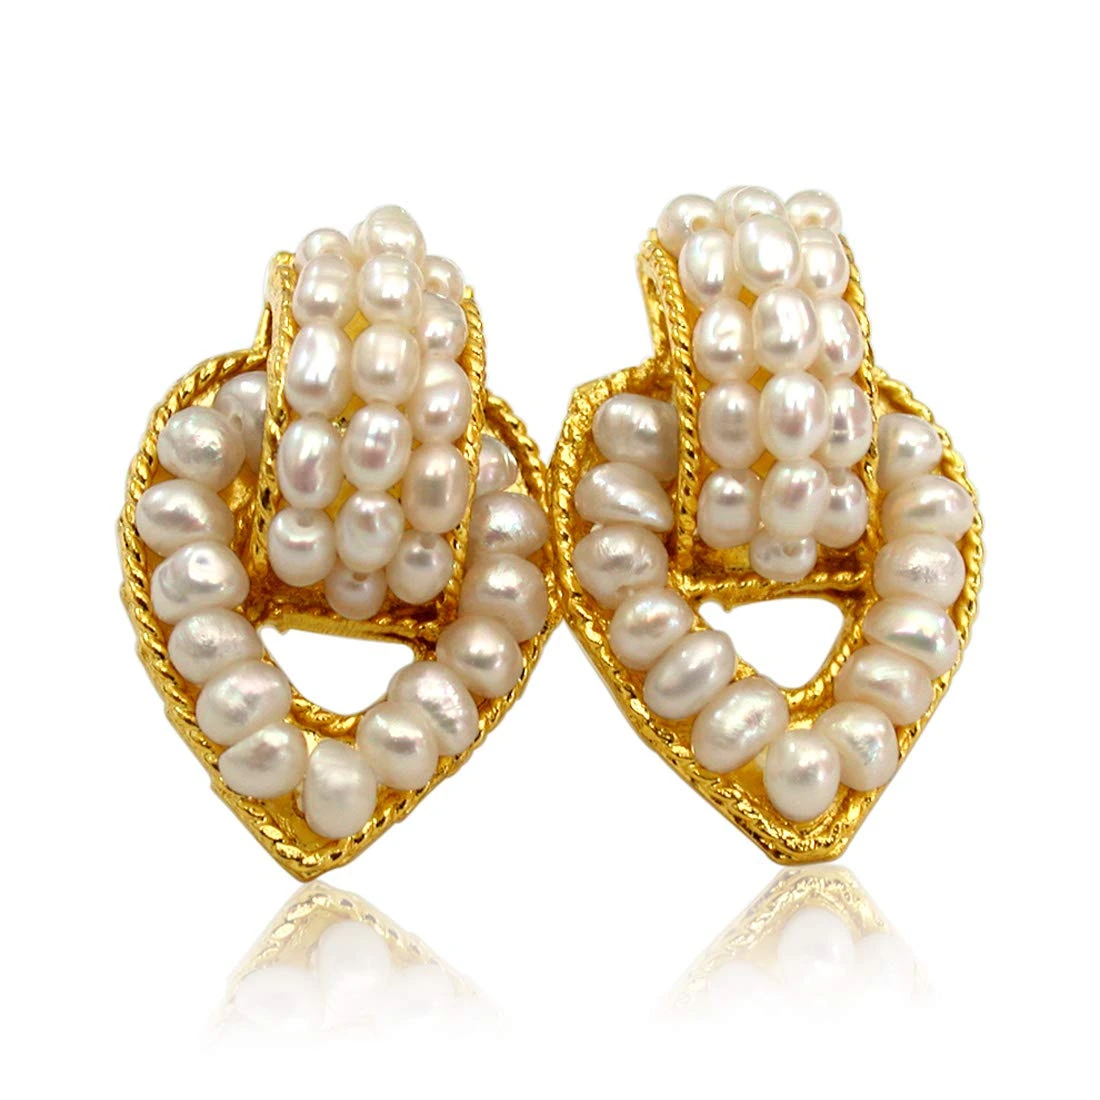 Pearl Charmer - Real Freshwater Pearl & Gold Plated Earrings for Women (SE50)